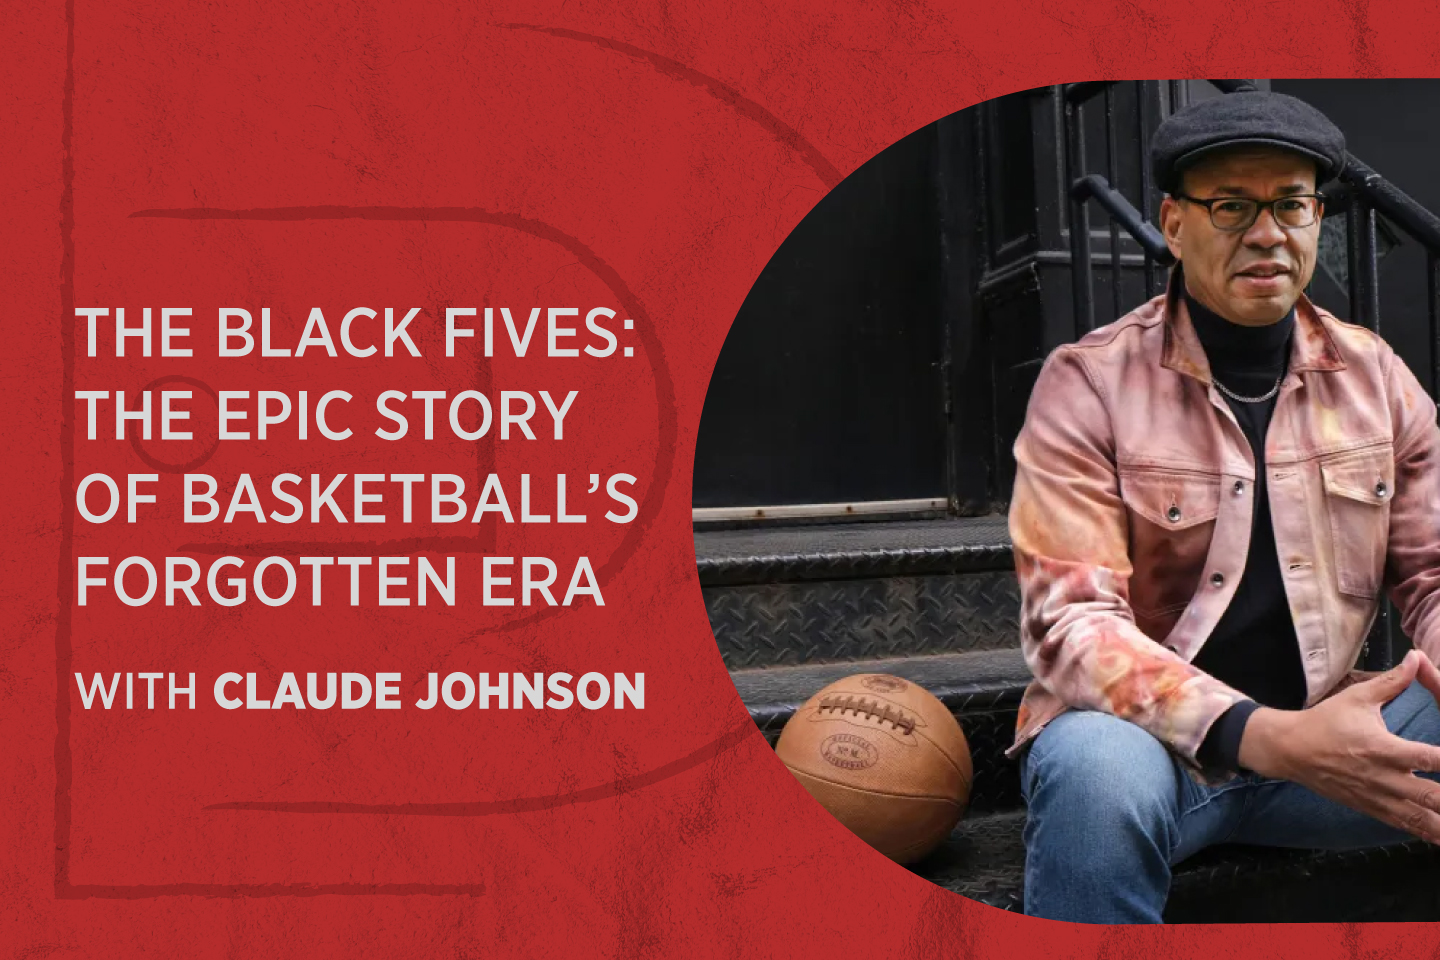 Image of author with title: The Black Fives: The Epic Story of Basketball's Forgotten Era with Claude Johnson